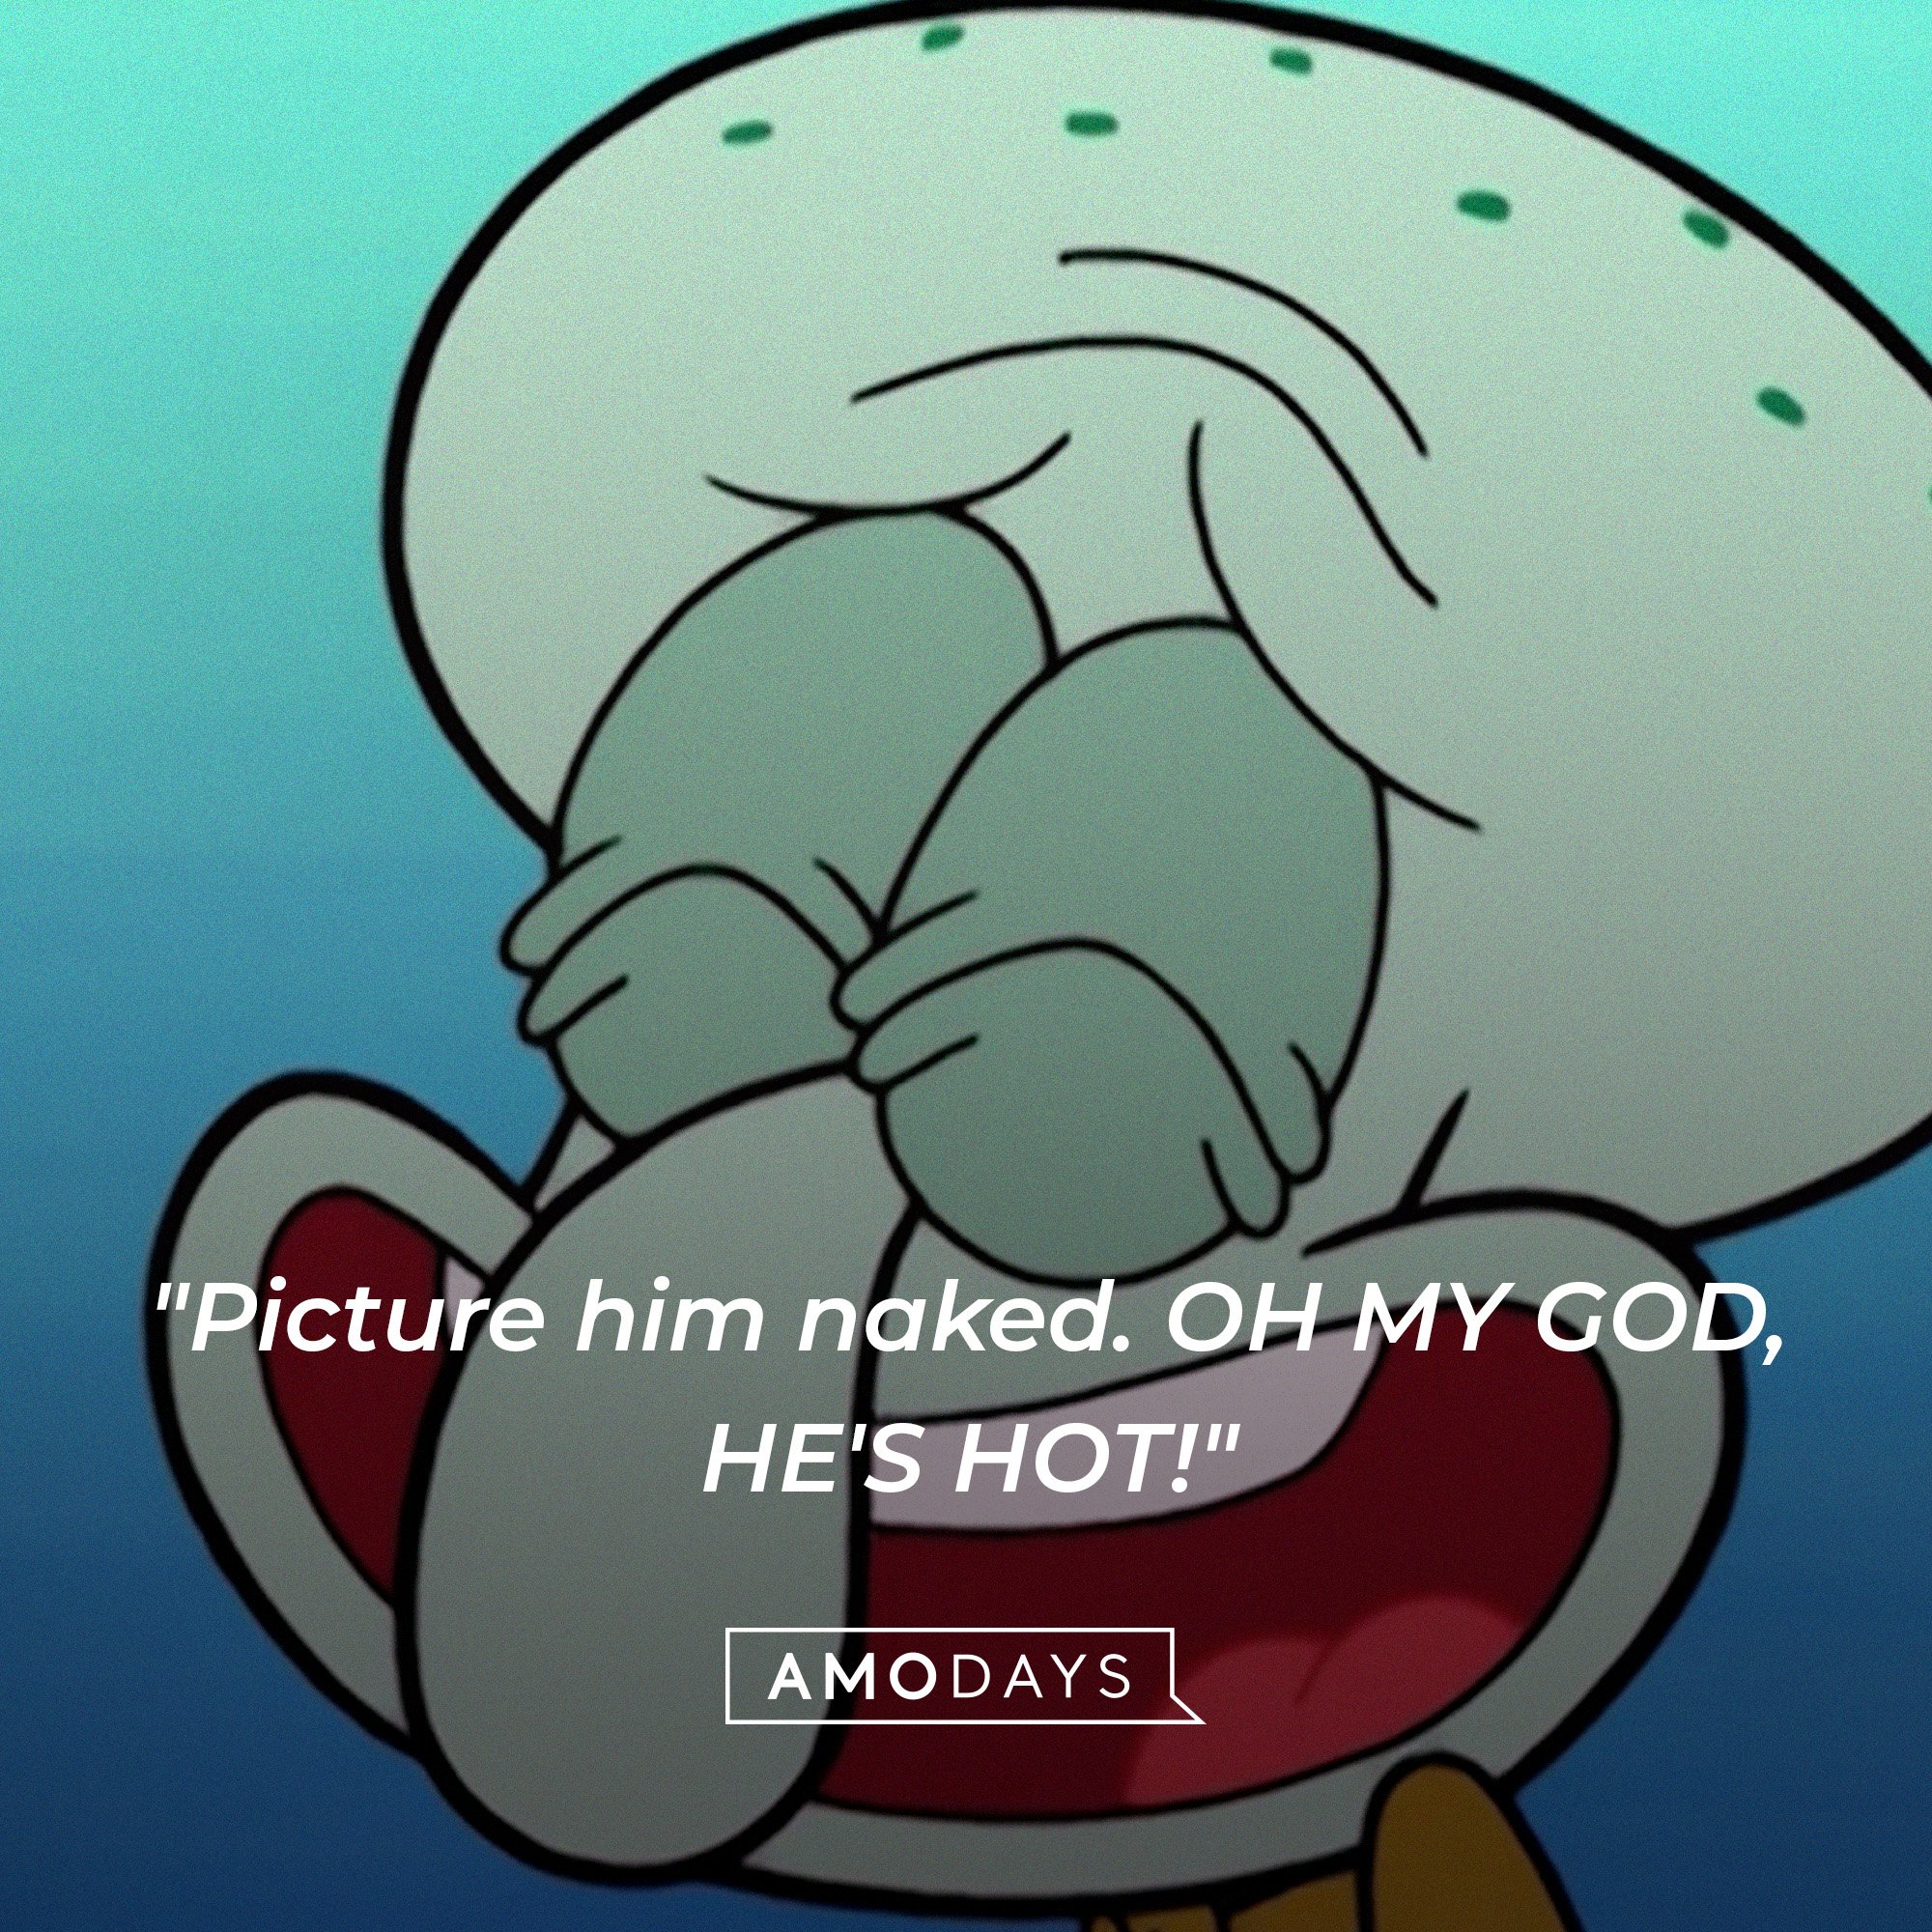  Squidward Tentacles’ quote: "Picture him naked. OH MY GOD, HE'S HOT!" | Source: AmoDays